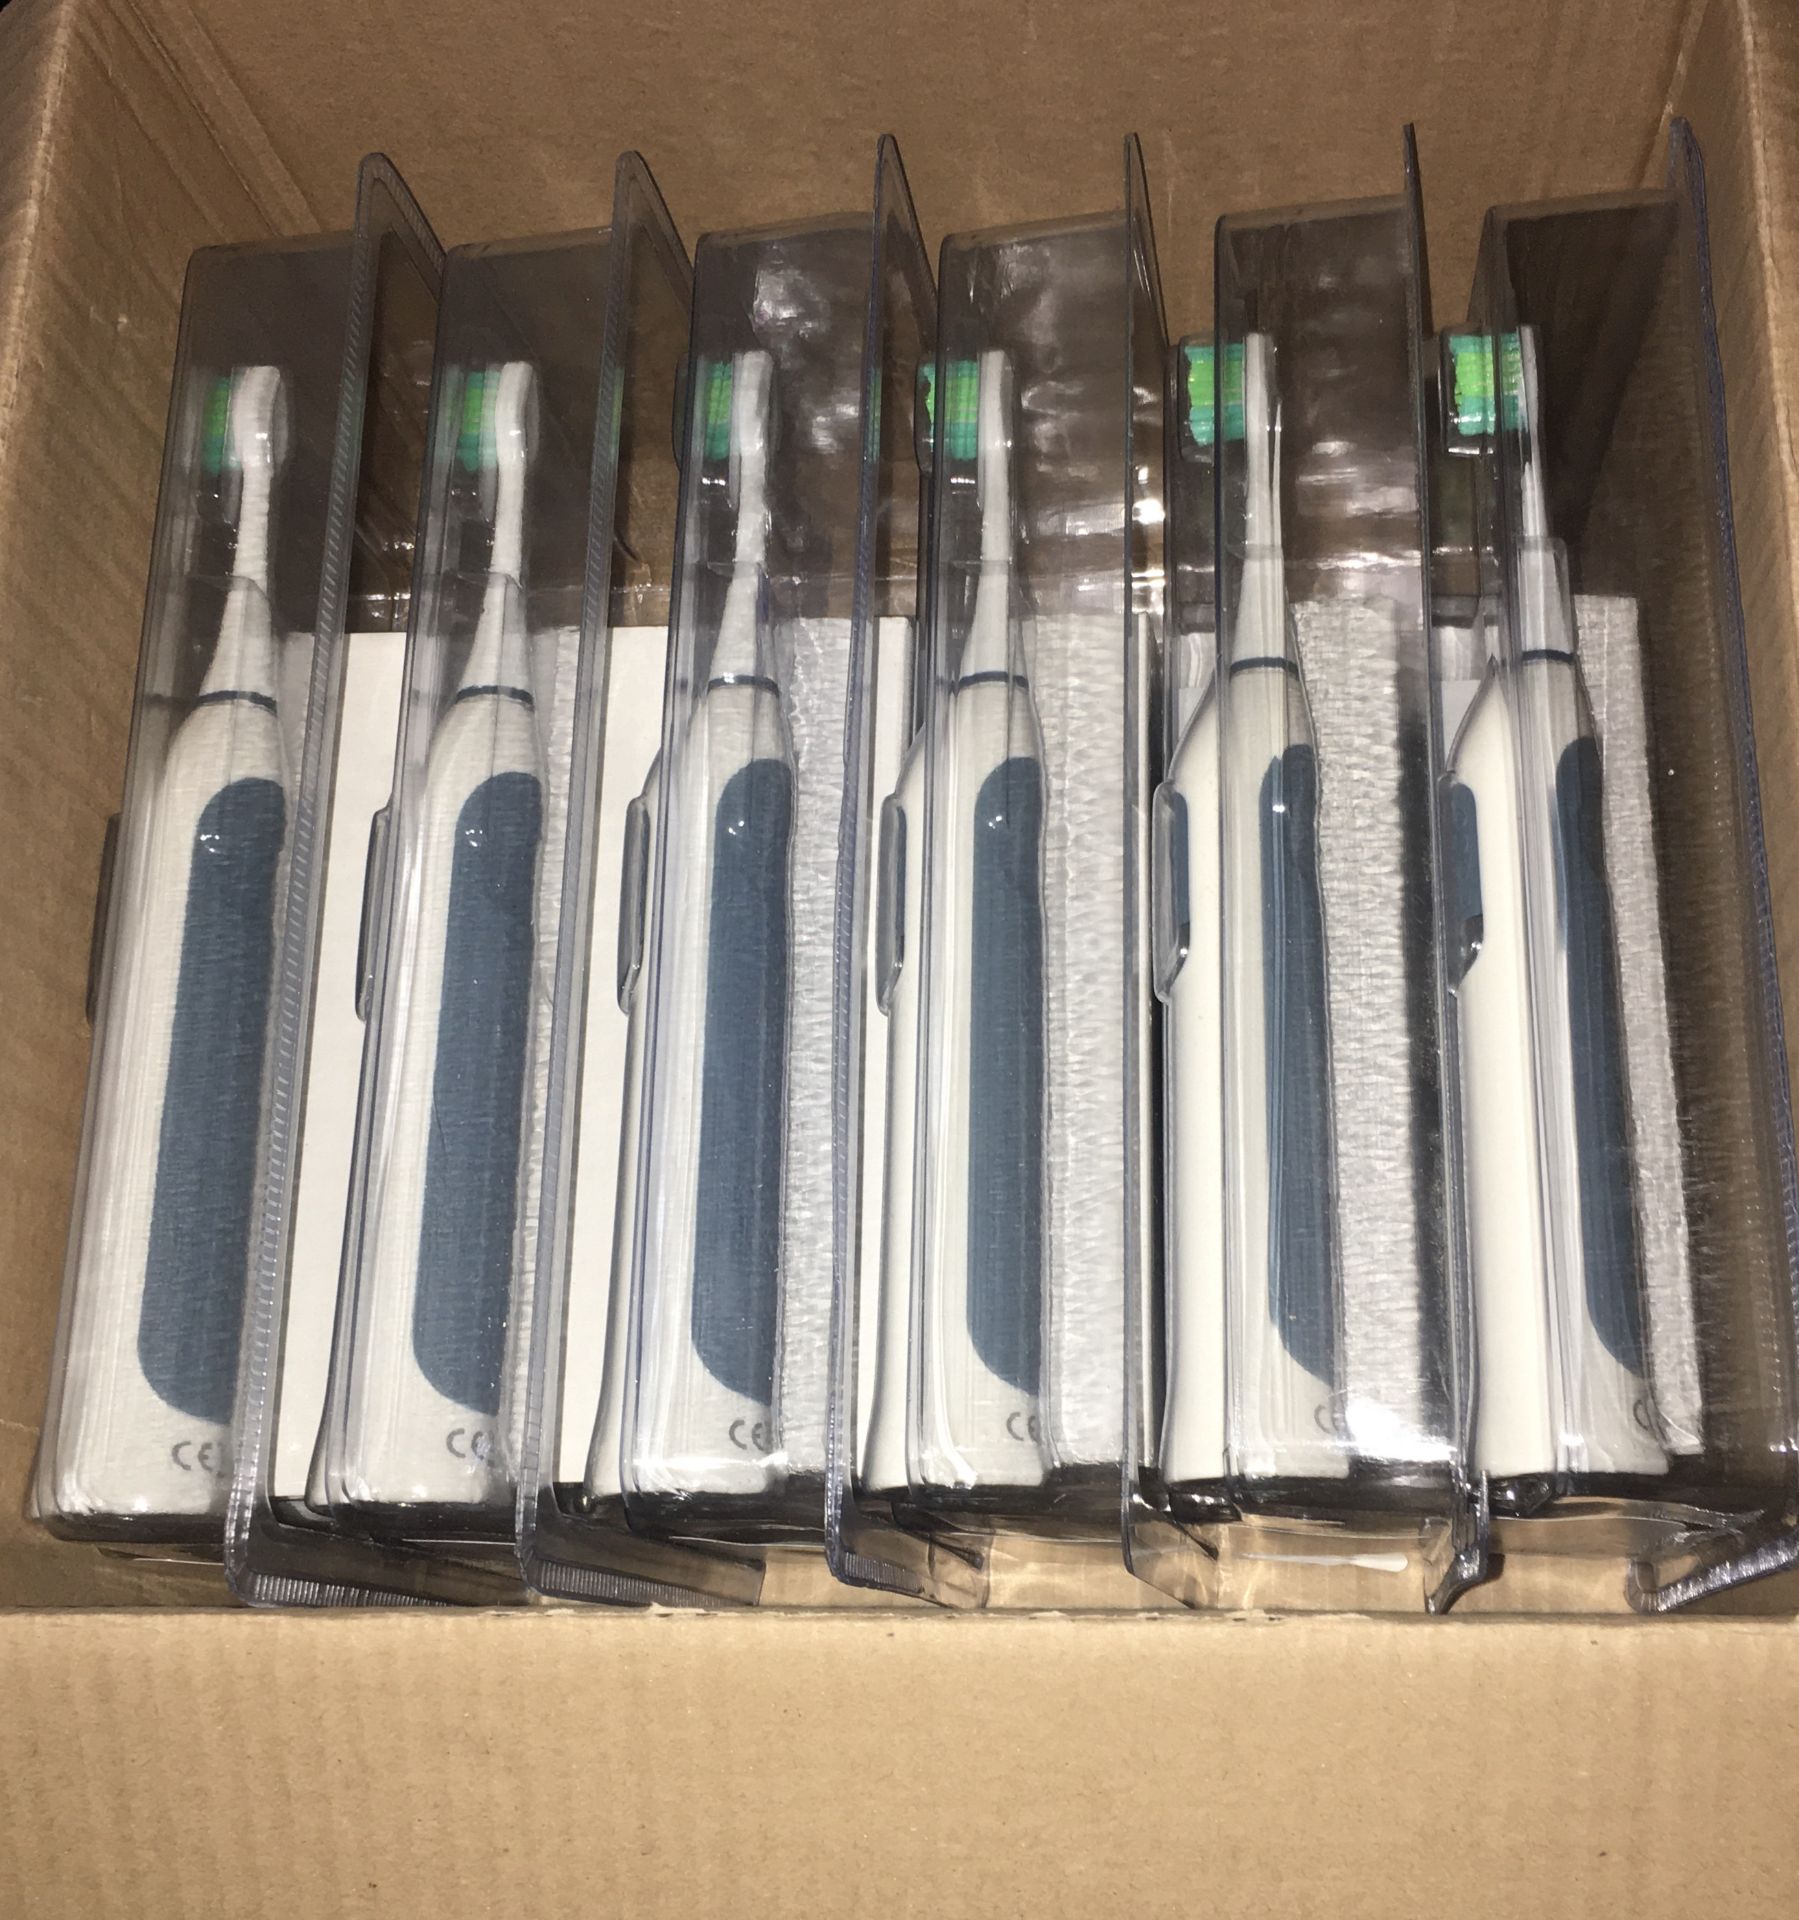 6x New Sonic Toothbrushes - Image 2 of 2